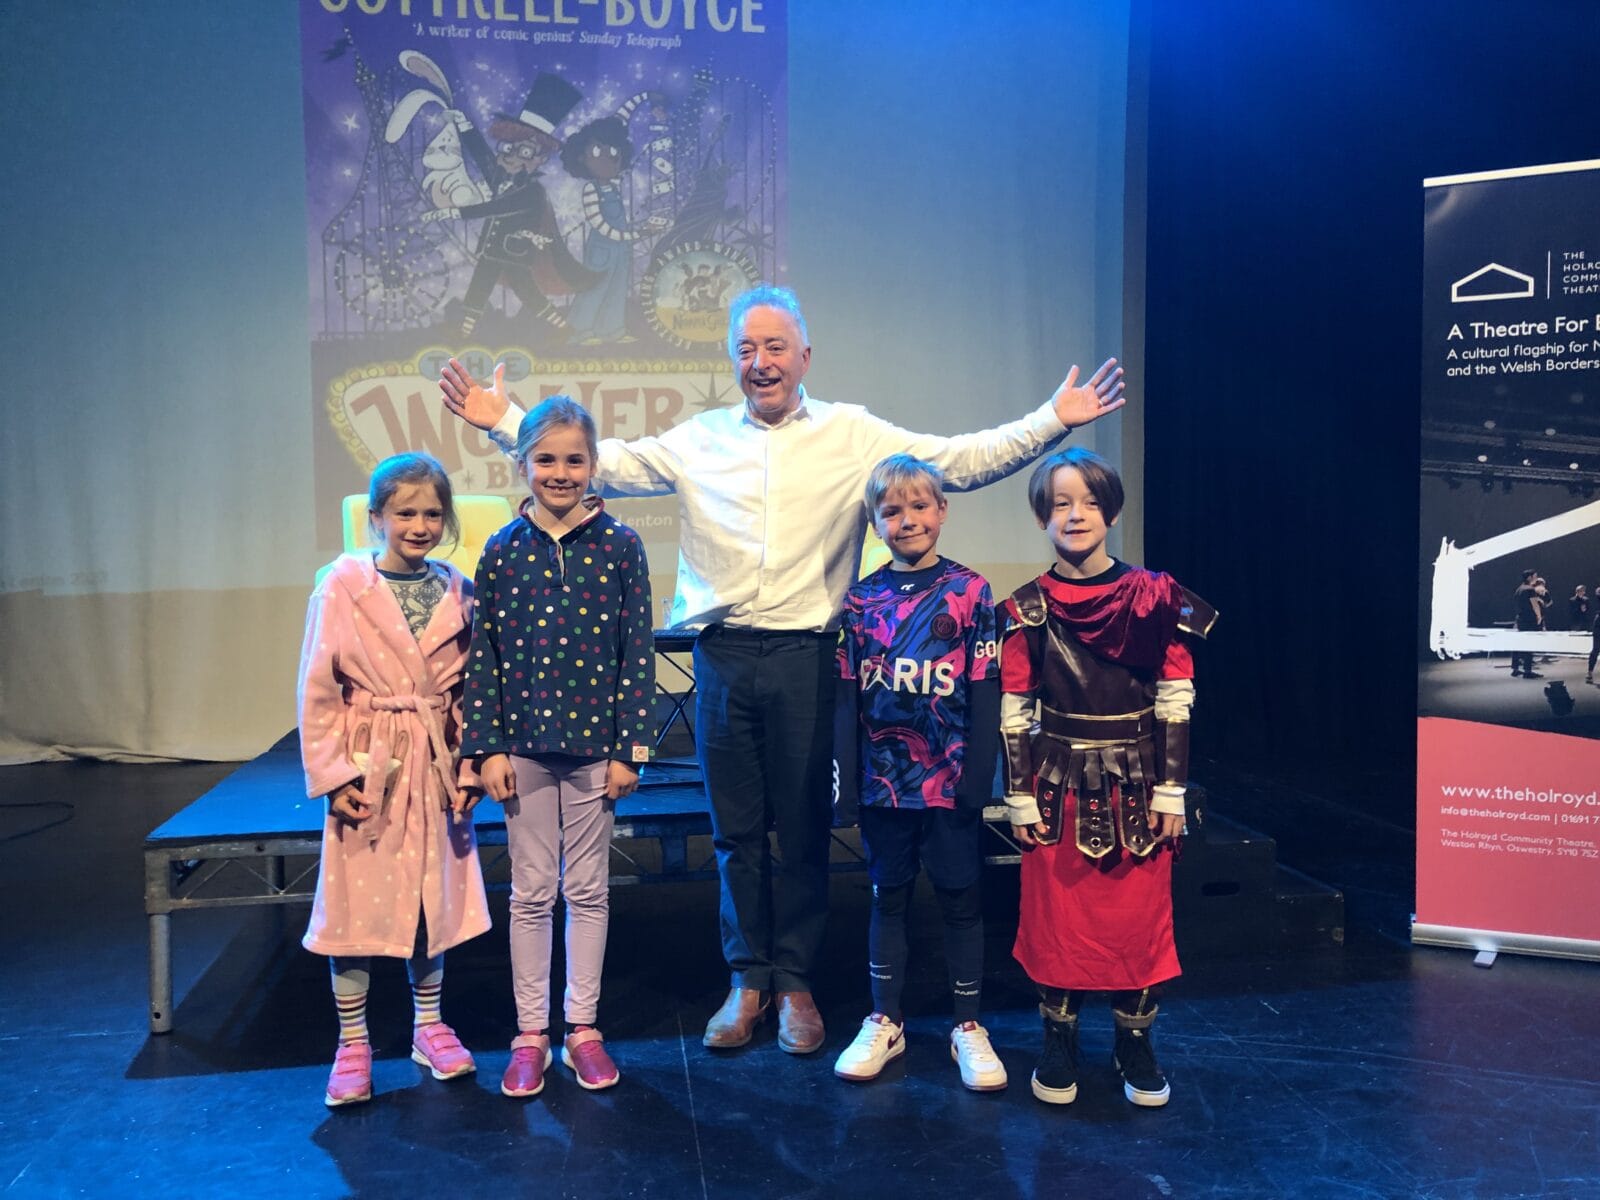 Author with four pupils celebrating world book day